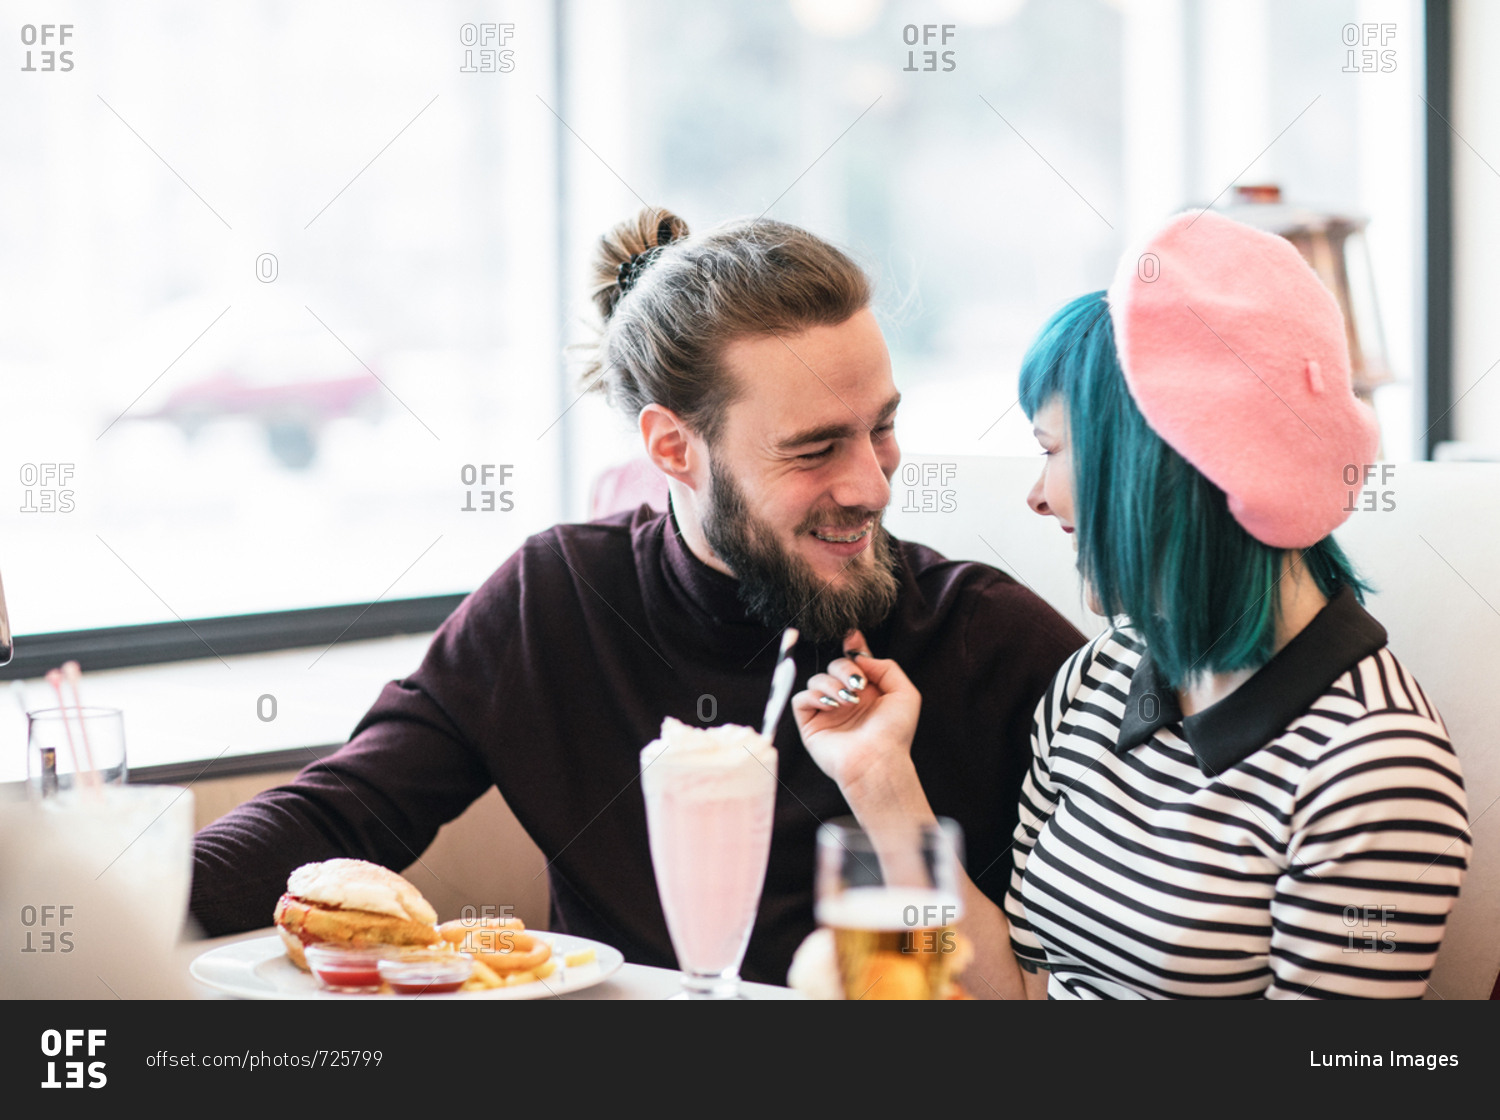 Young stylish man and woman in love eating vegetarian burgers an milkshake at vintage diner restaurant